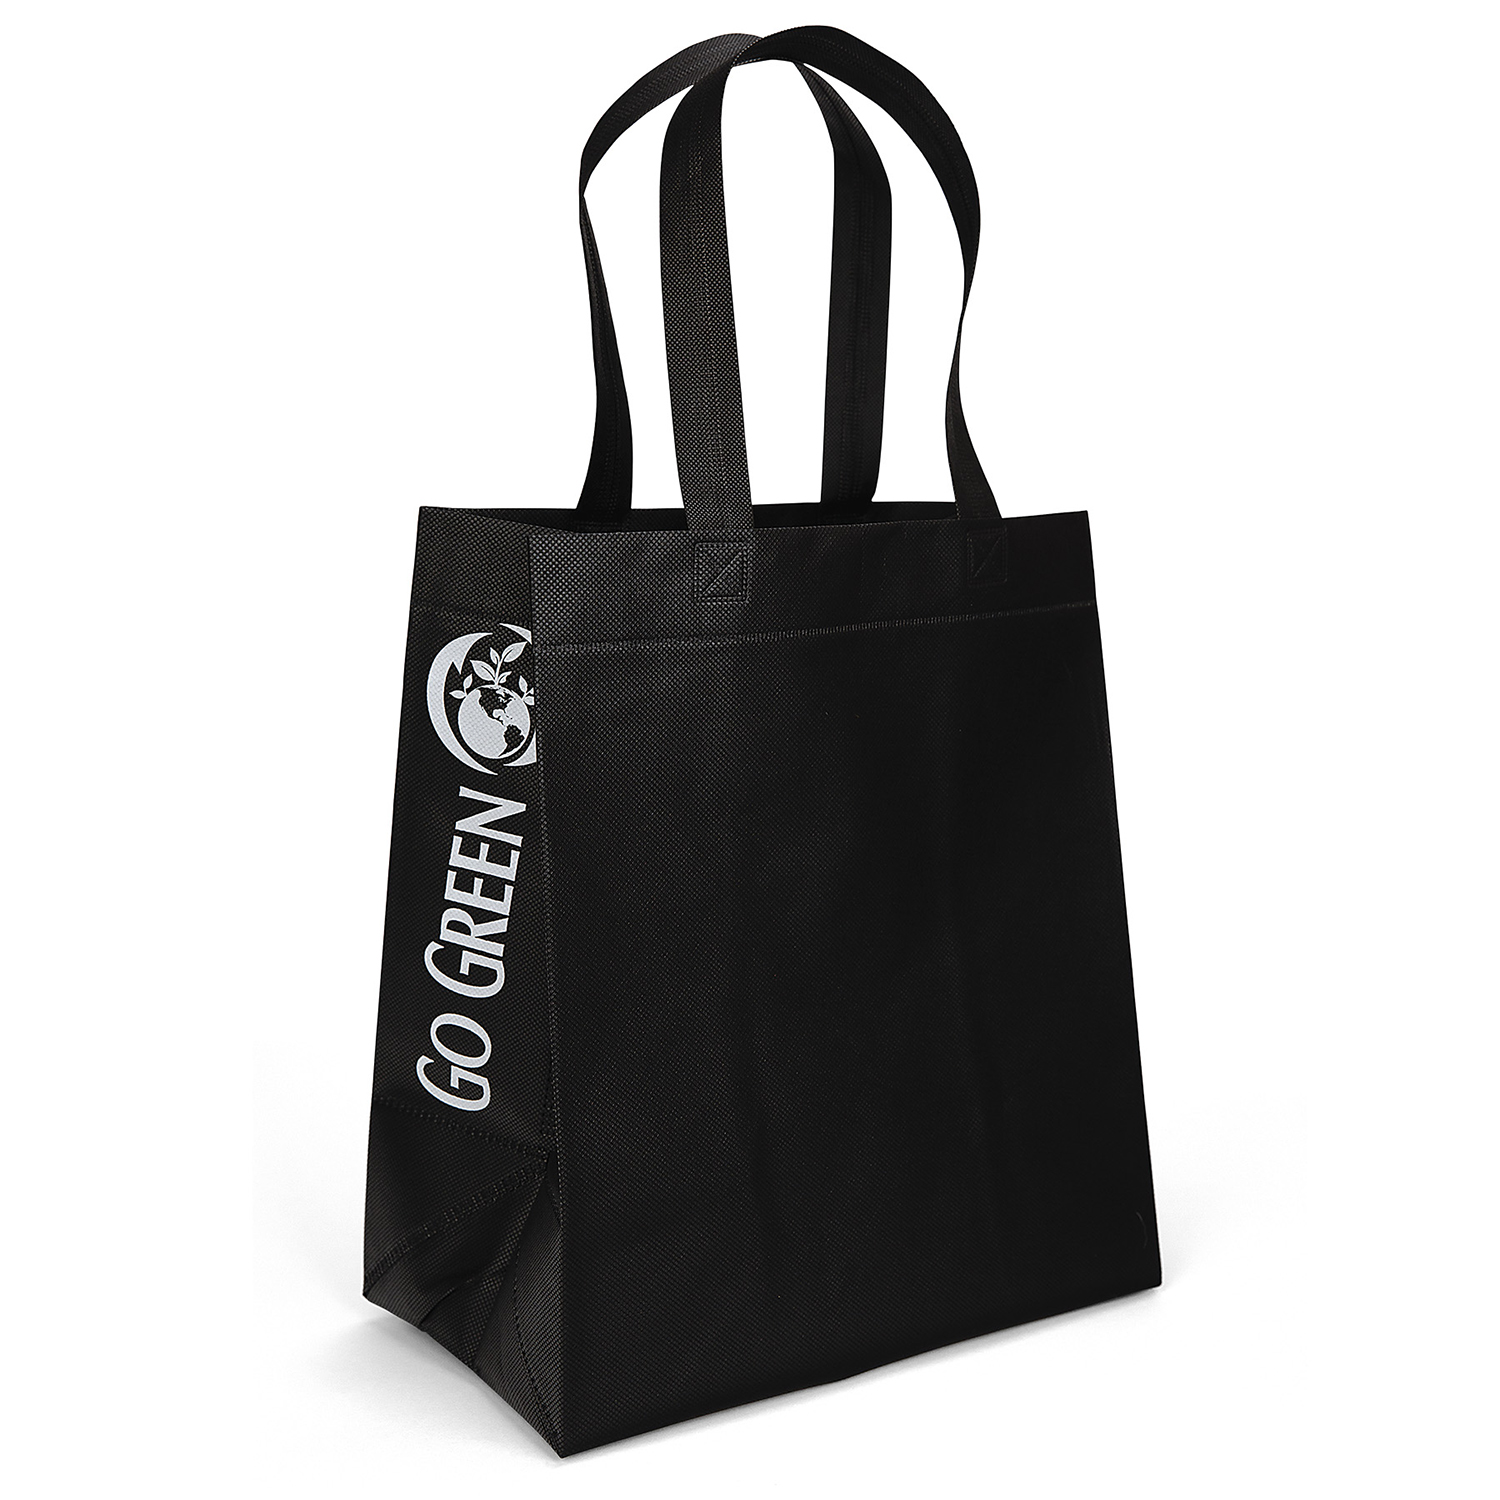 Bag Makers SPET1315 - Custom Printed Eco-Friendly Promotional Non-Woven Grocery Tote Bag